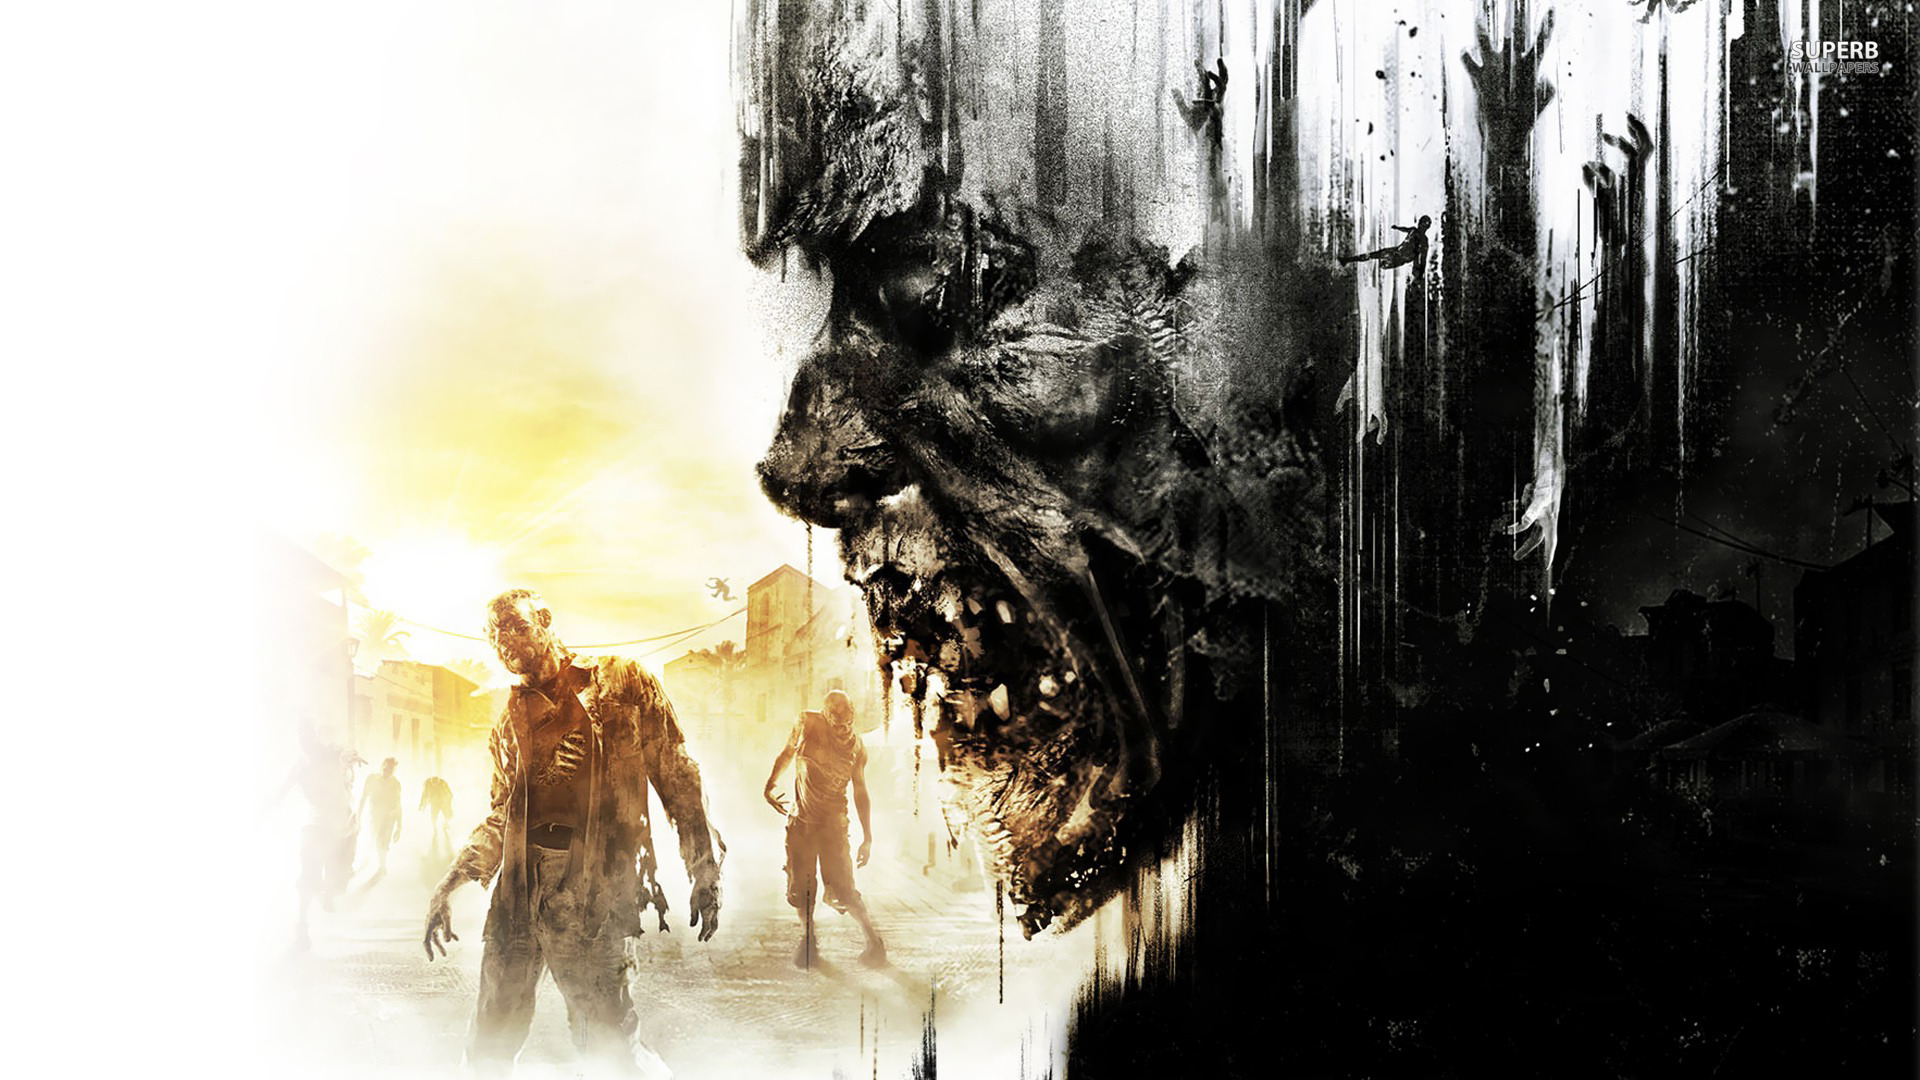 video game, dying light